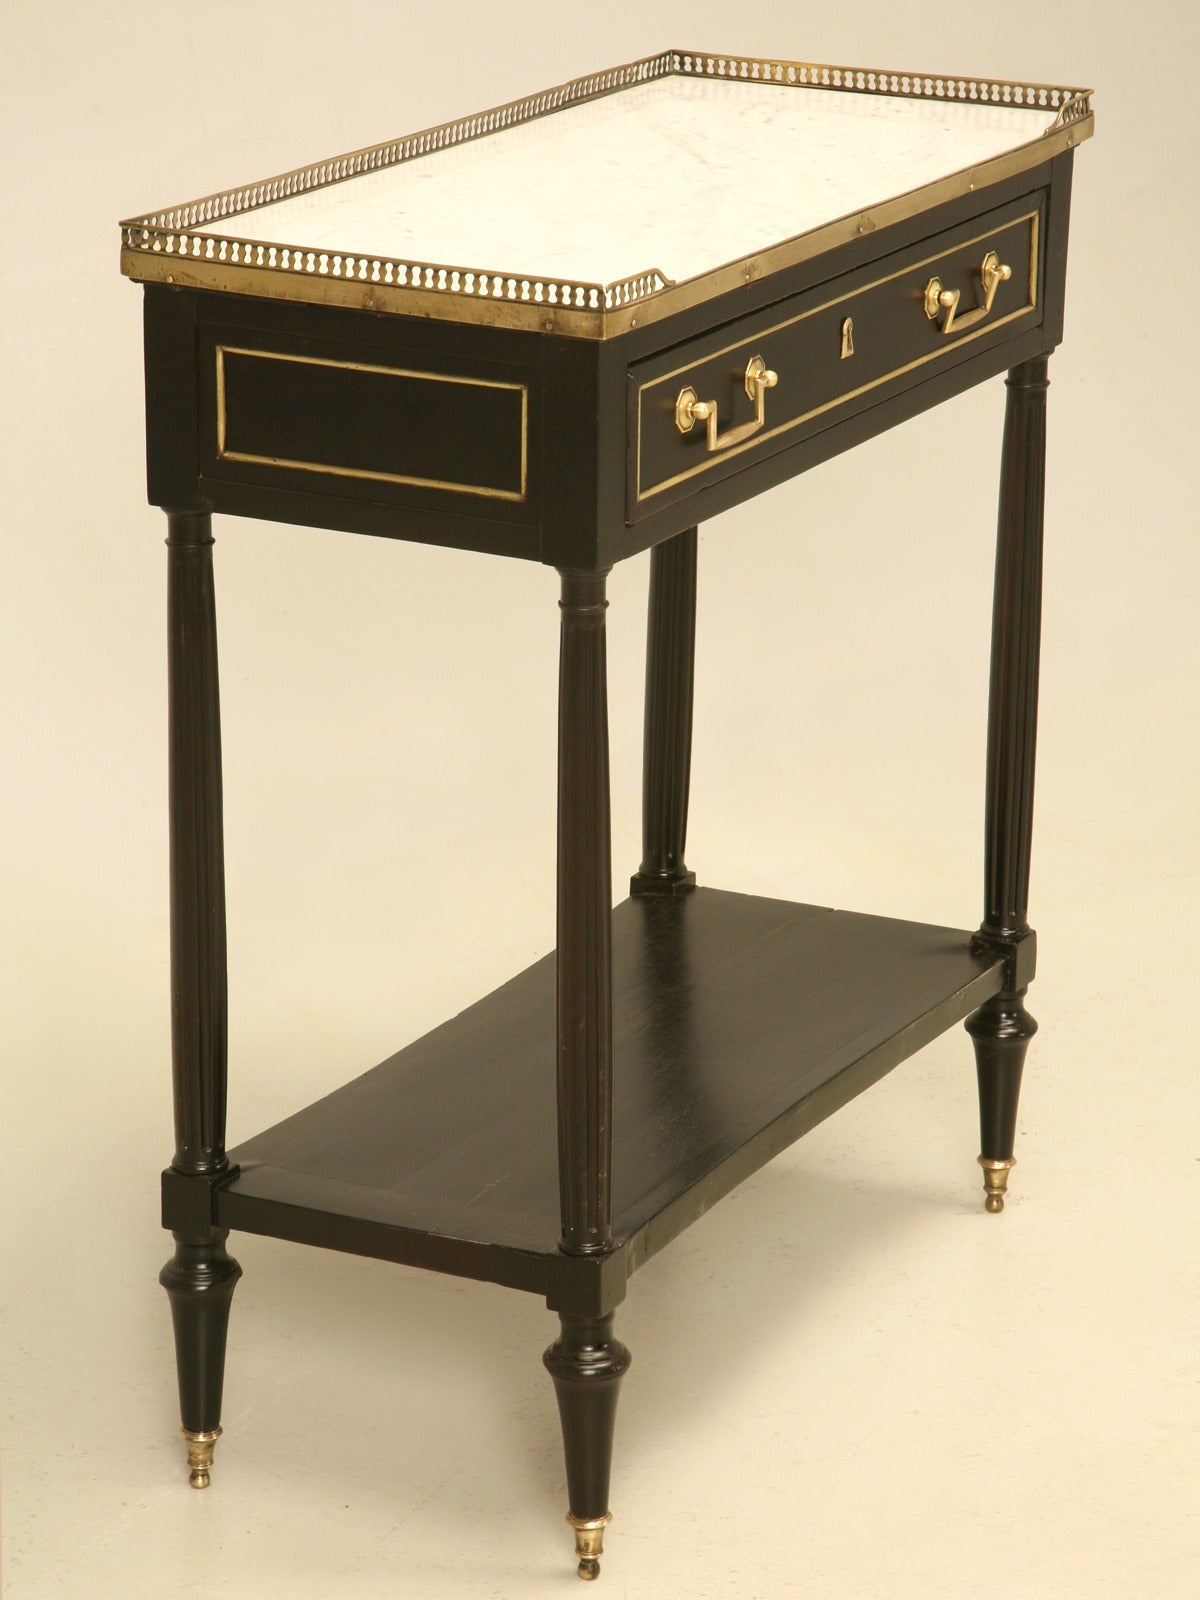 Antique French console table made from solid mahogany with a beautiful deep ebonized finish, original white marble top and a brass gallery, circa late 1800s. Please note old repairs to the gallery. Conversely the black finish is exquisite and